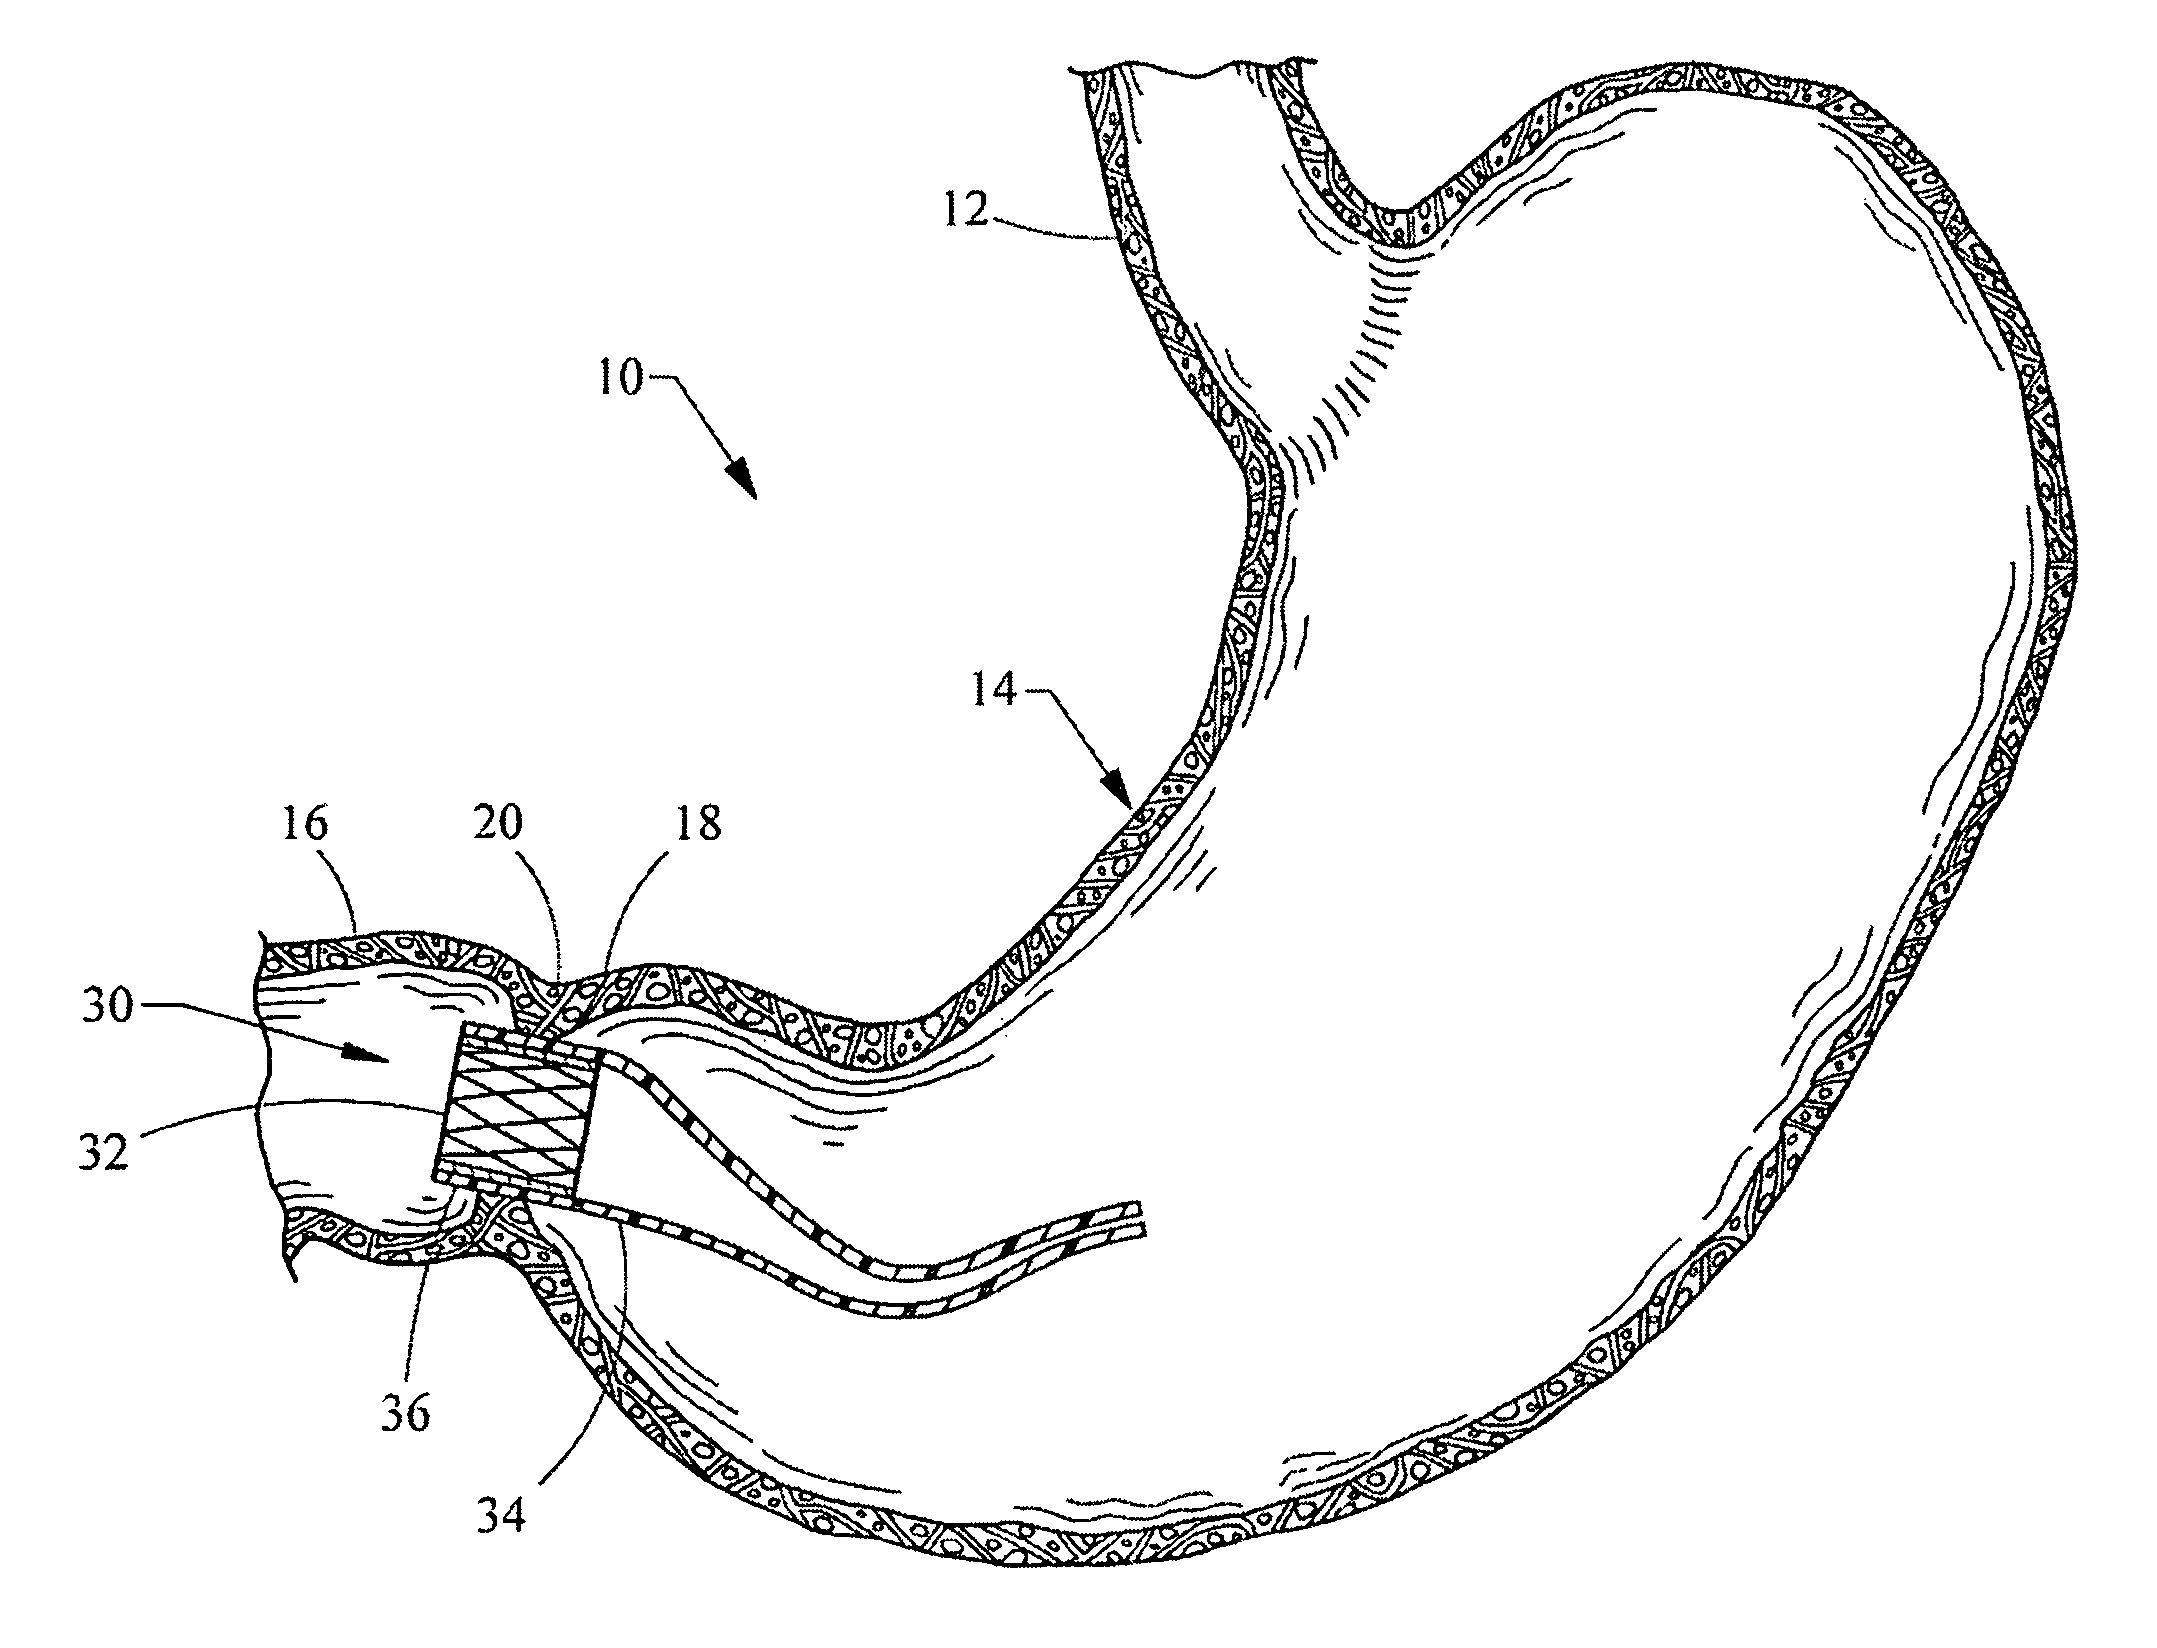 Apparatus and methods for delaying gastric emptying to treat obesity